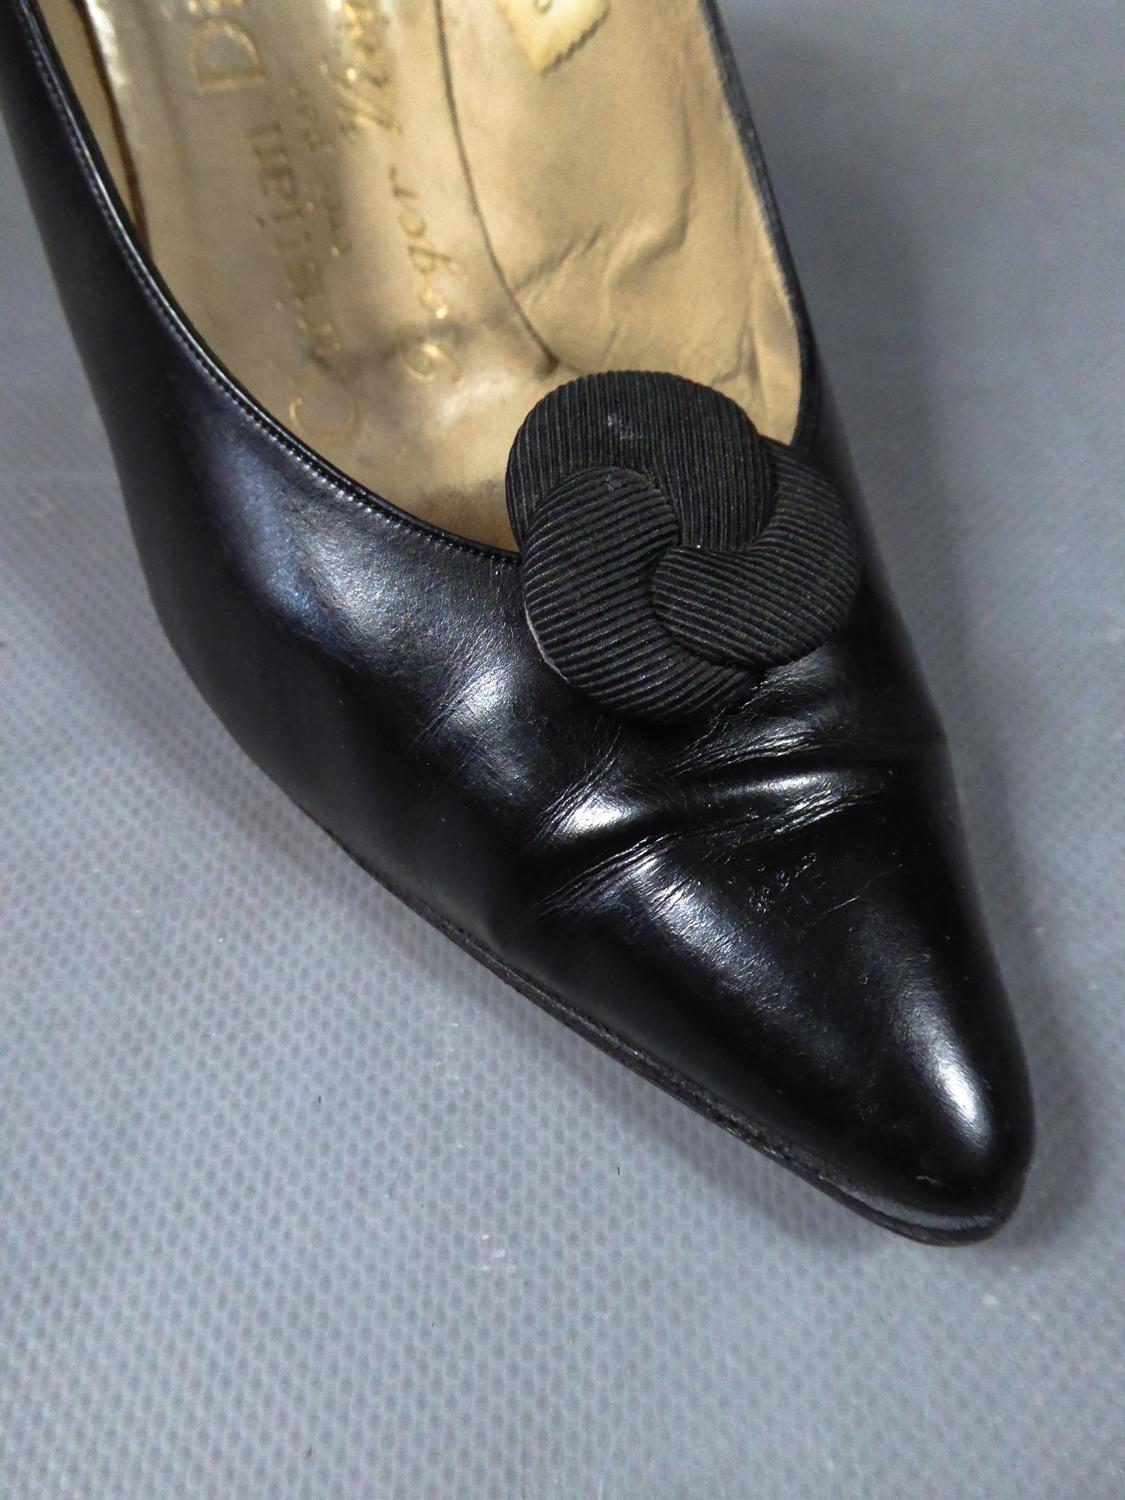 Black A Christian Dior pair of evening Shoes by Roger Vivier Circa 1960